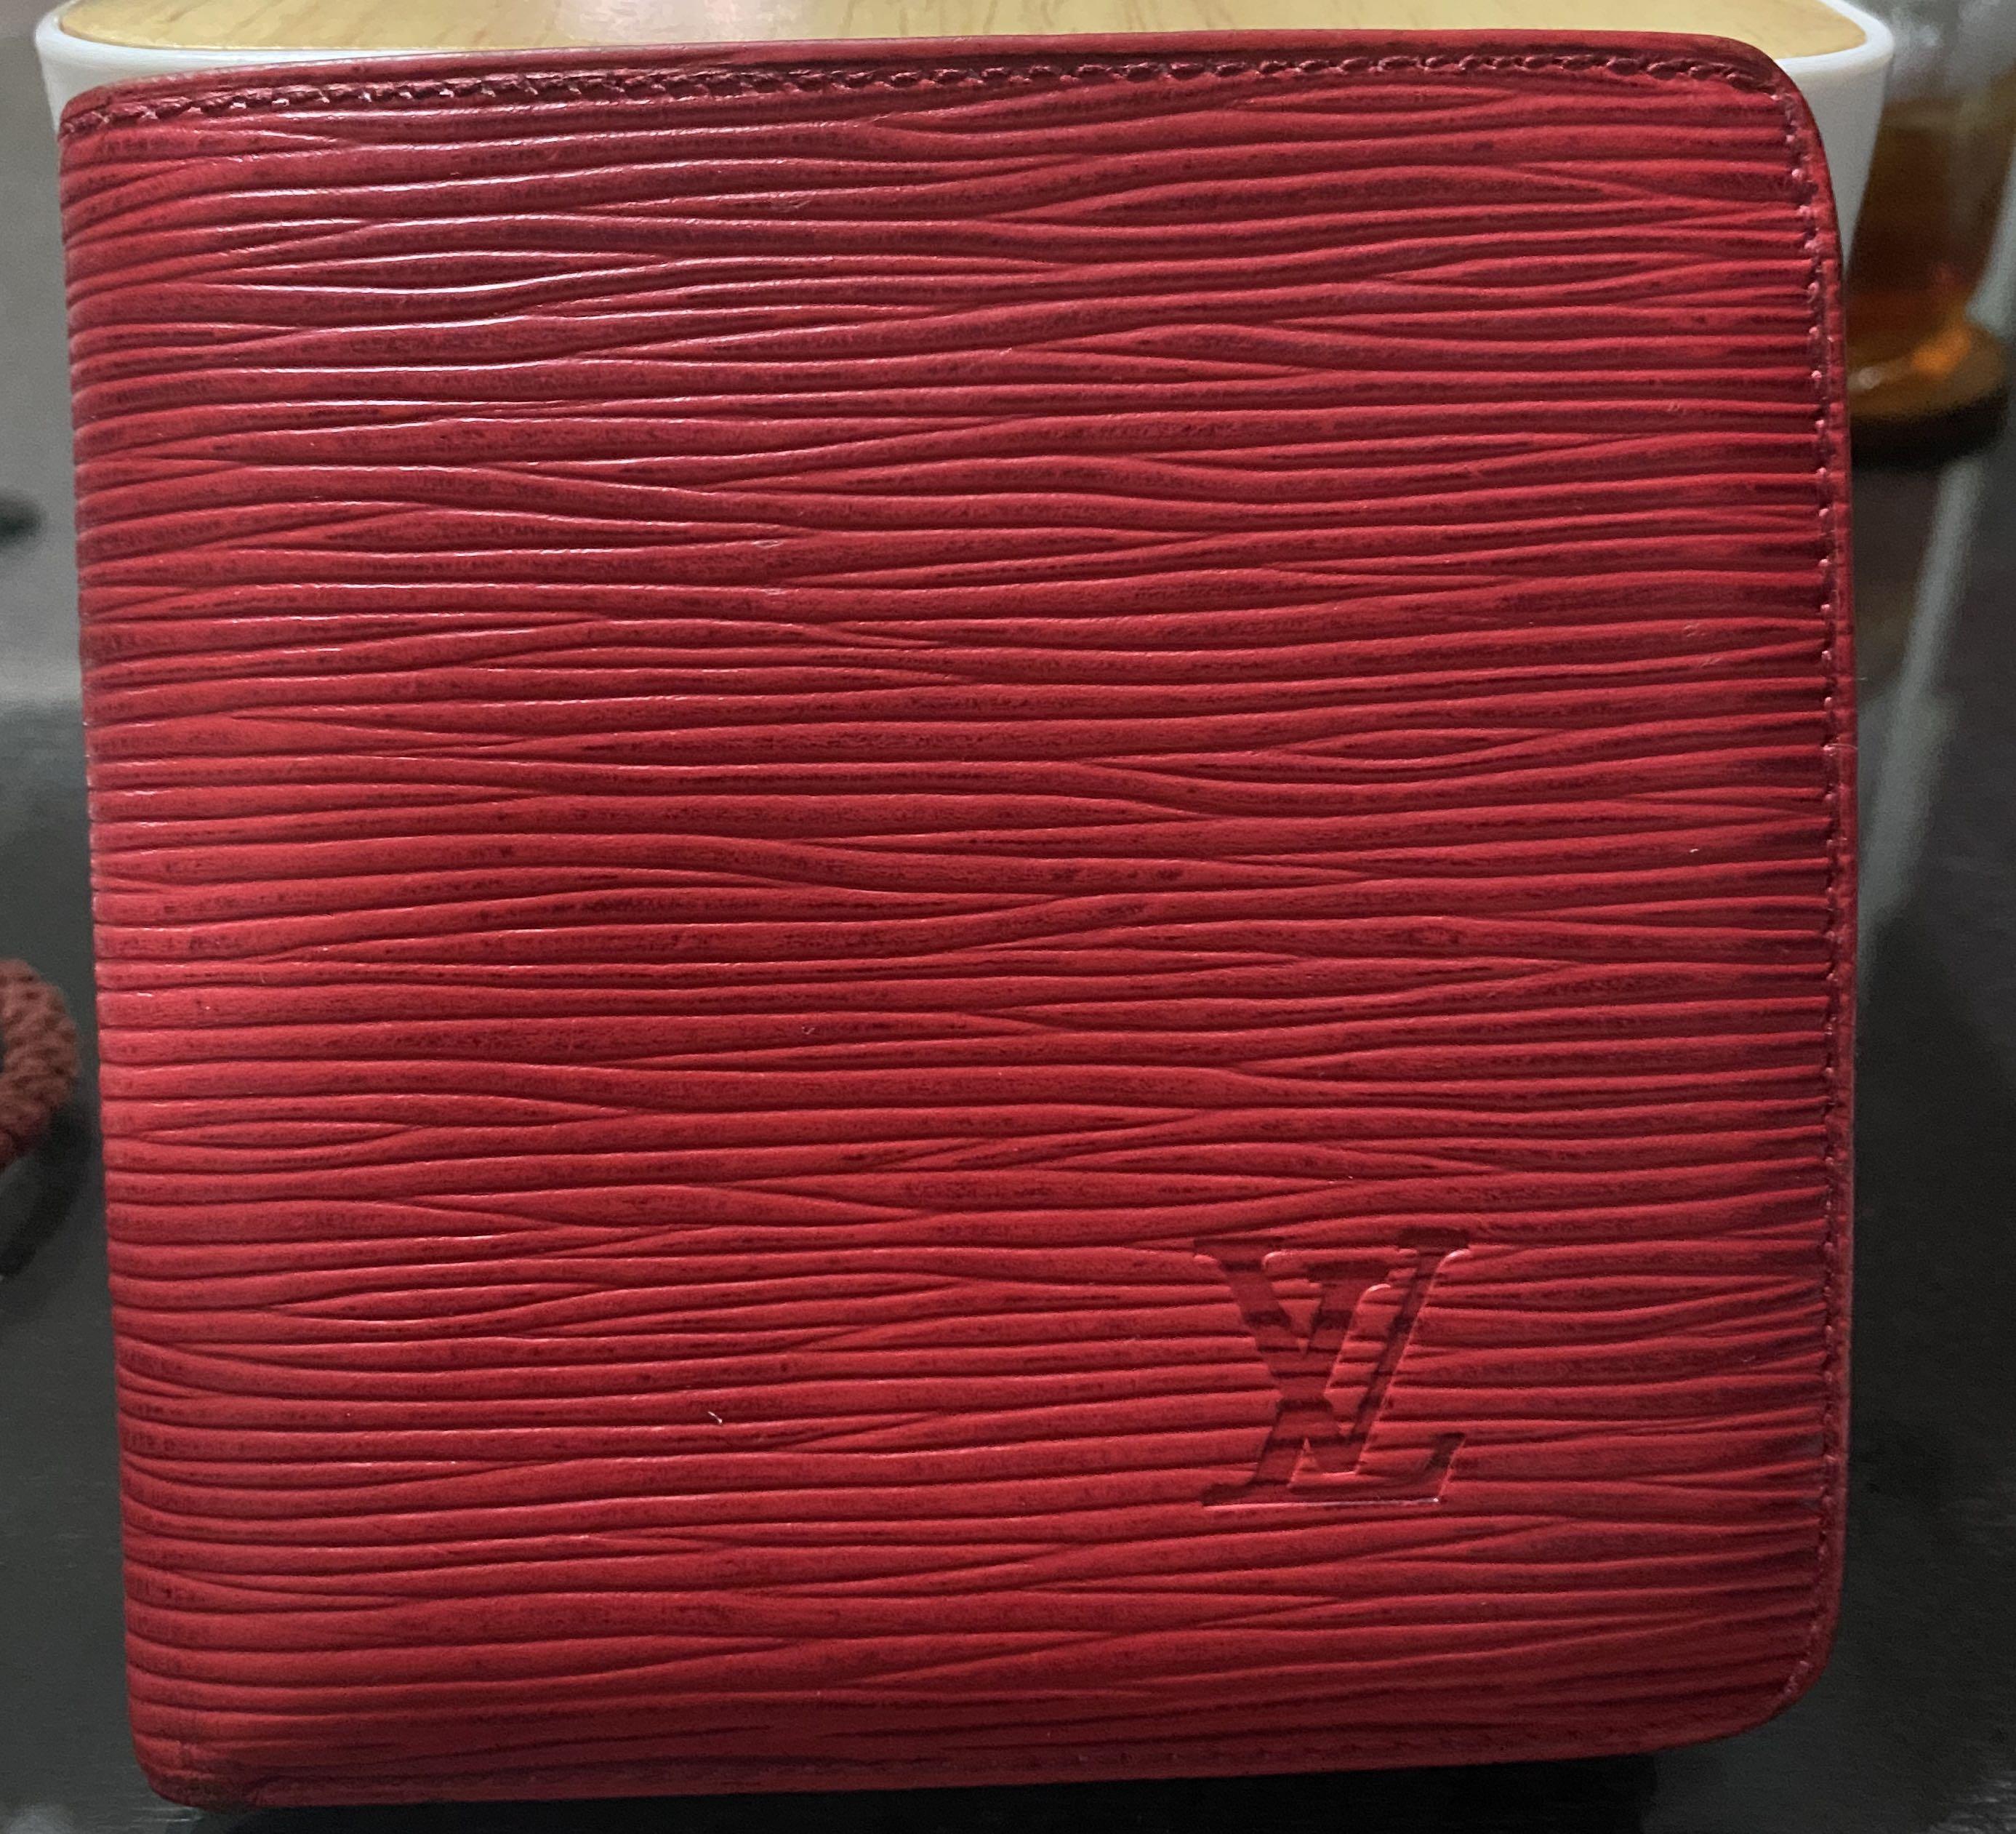 Authentic LOUIS VUITTON Marco Red Epi Leather Bifold Wallet